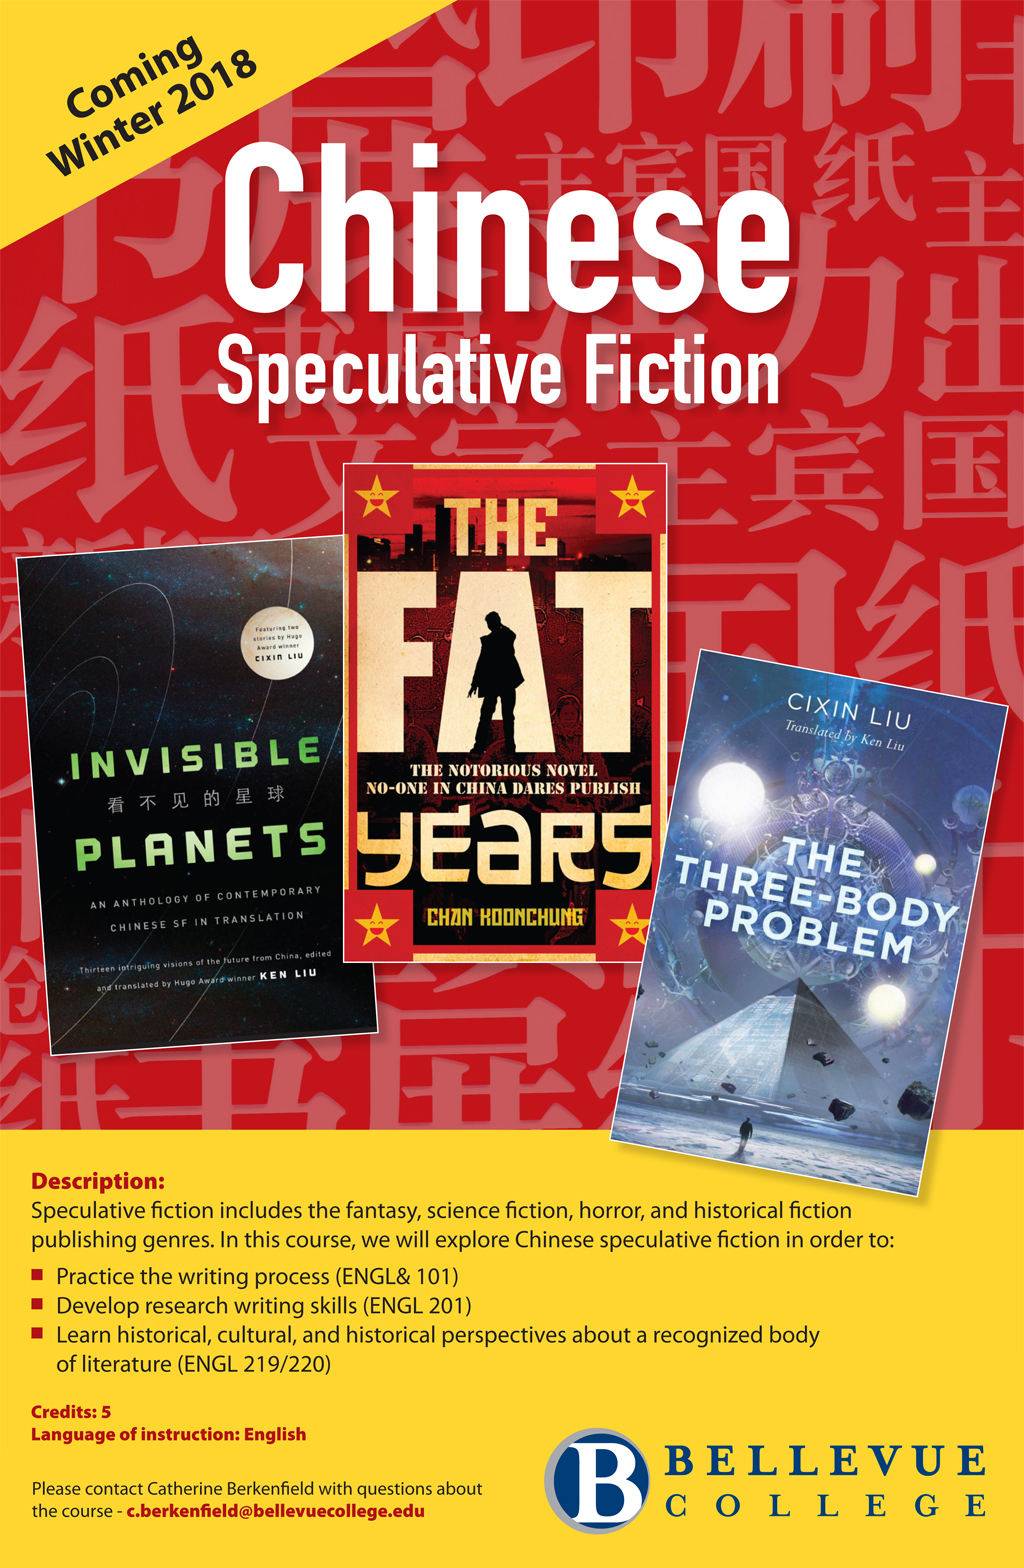 Poster promoting a new class in Chinese speculative fiction at Bellevue College